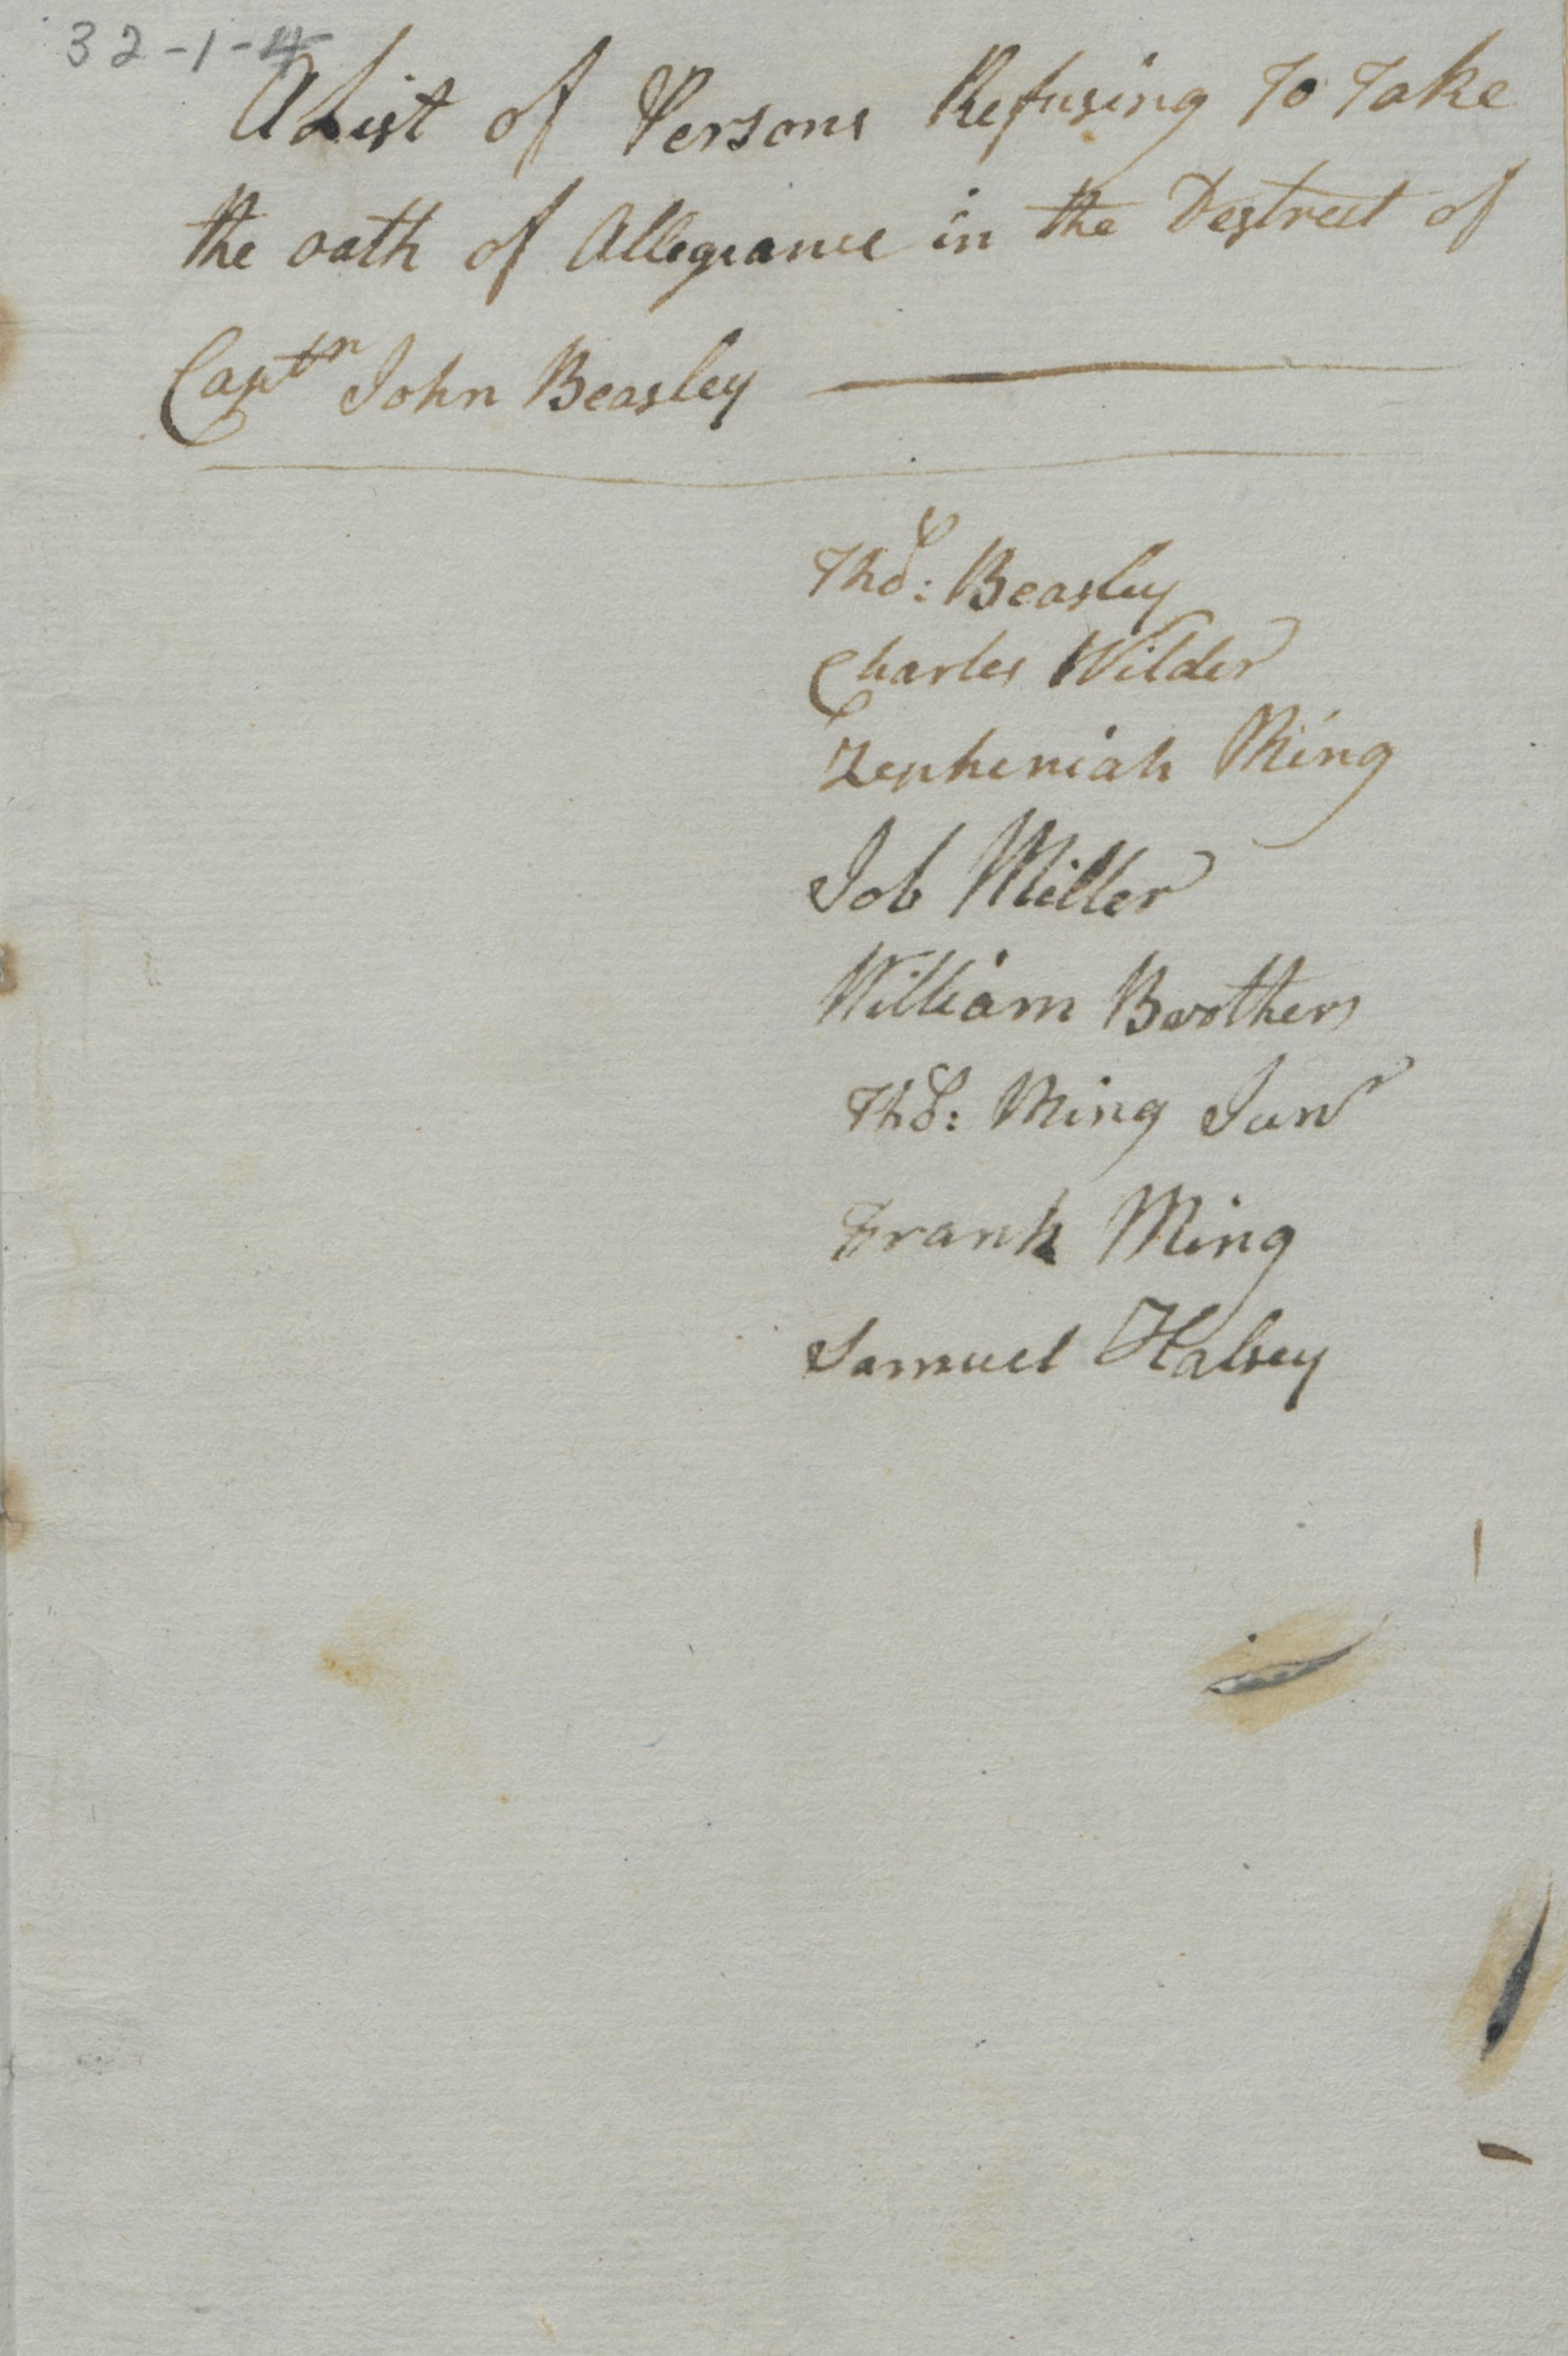 List of People Refusing to take the Oath of Allegiance in Chowan County, circa 2 May 1778, page 1